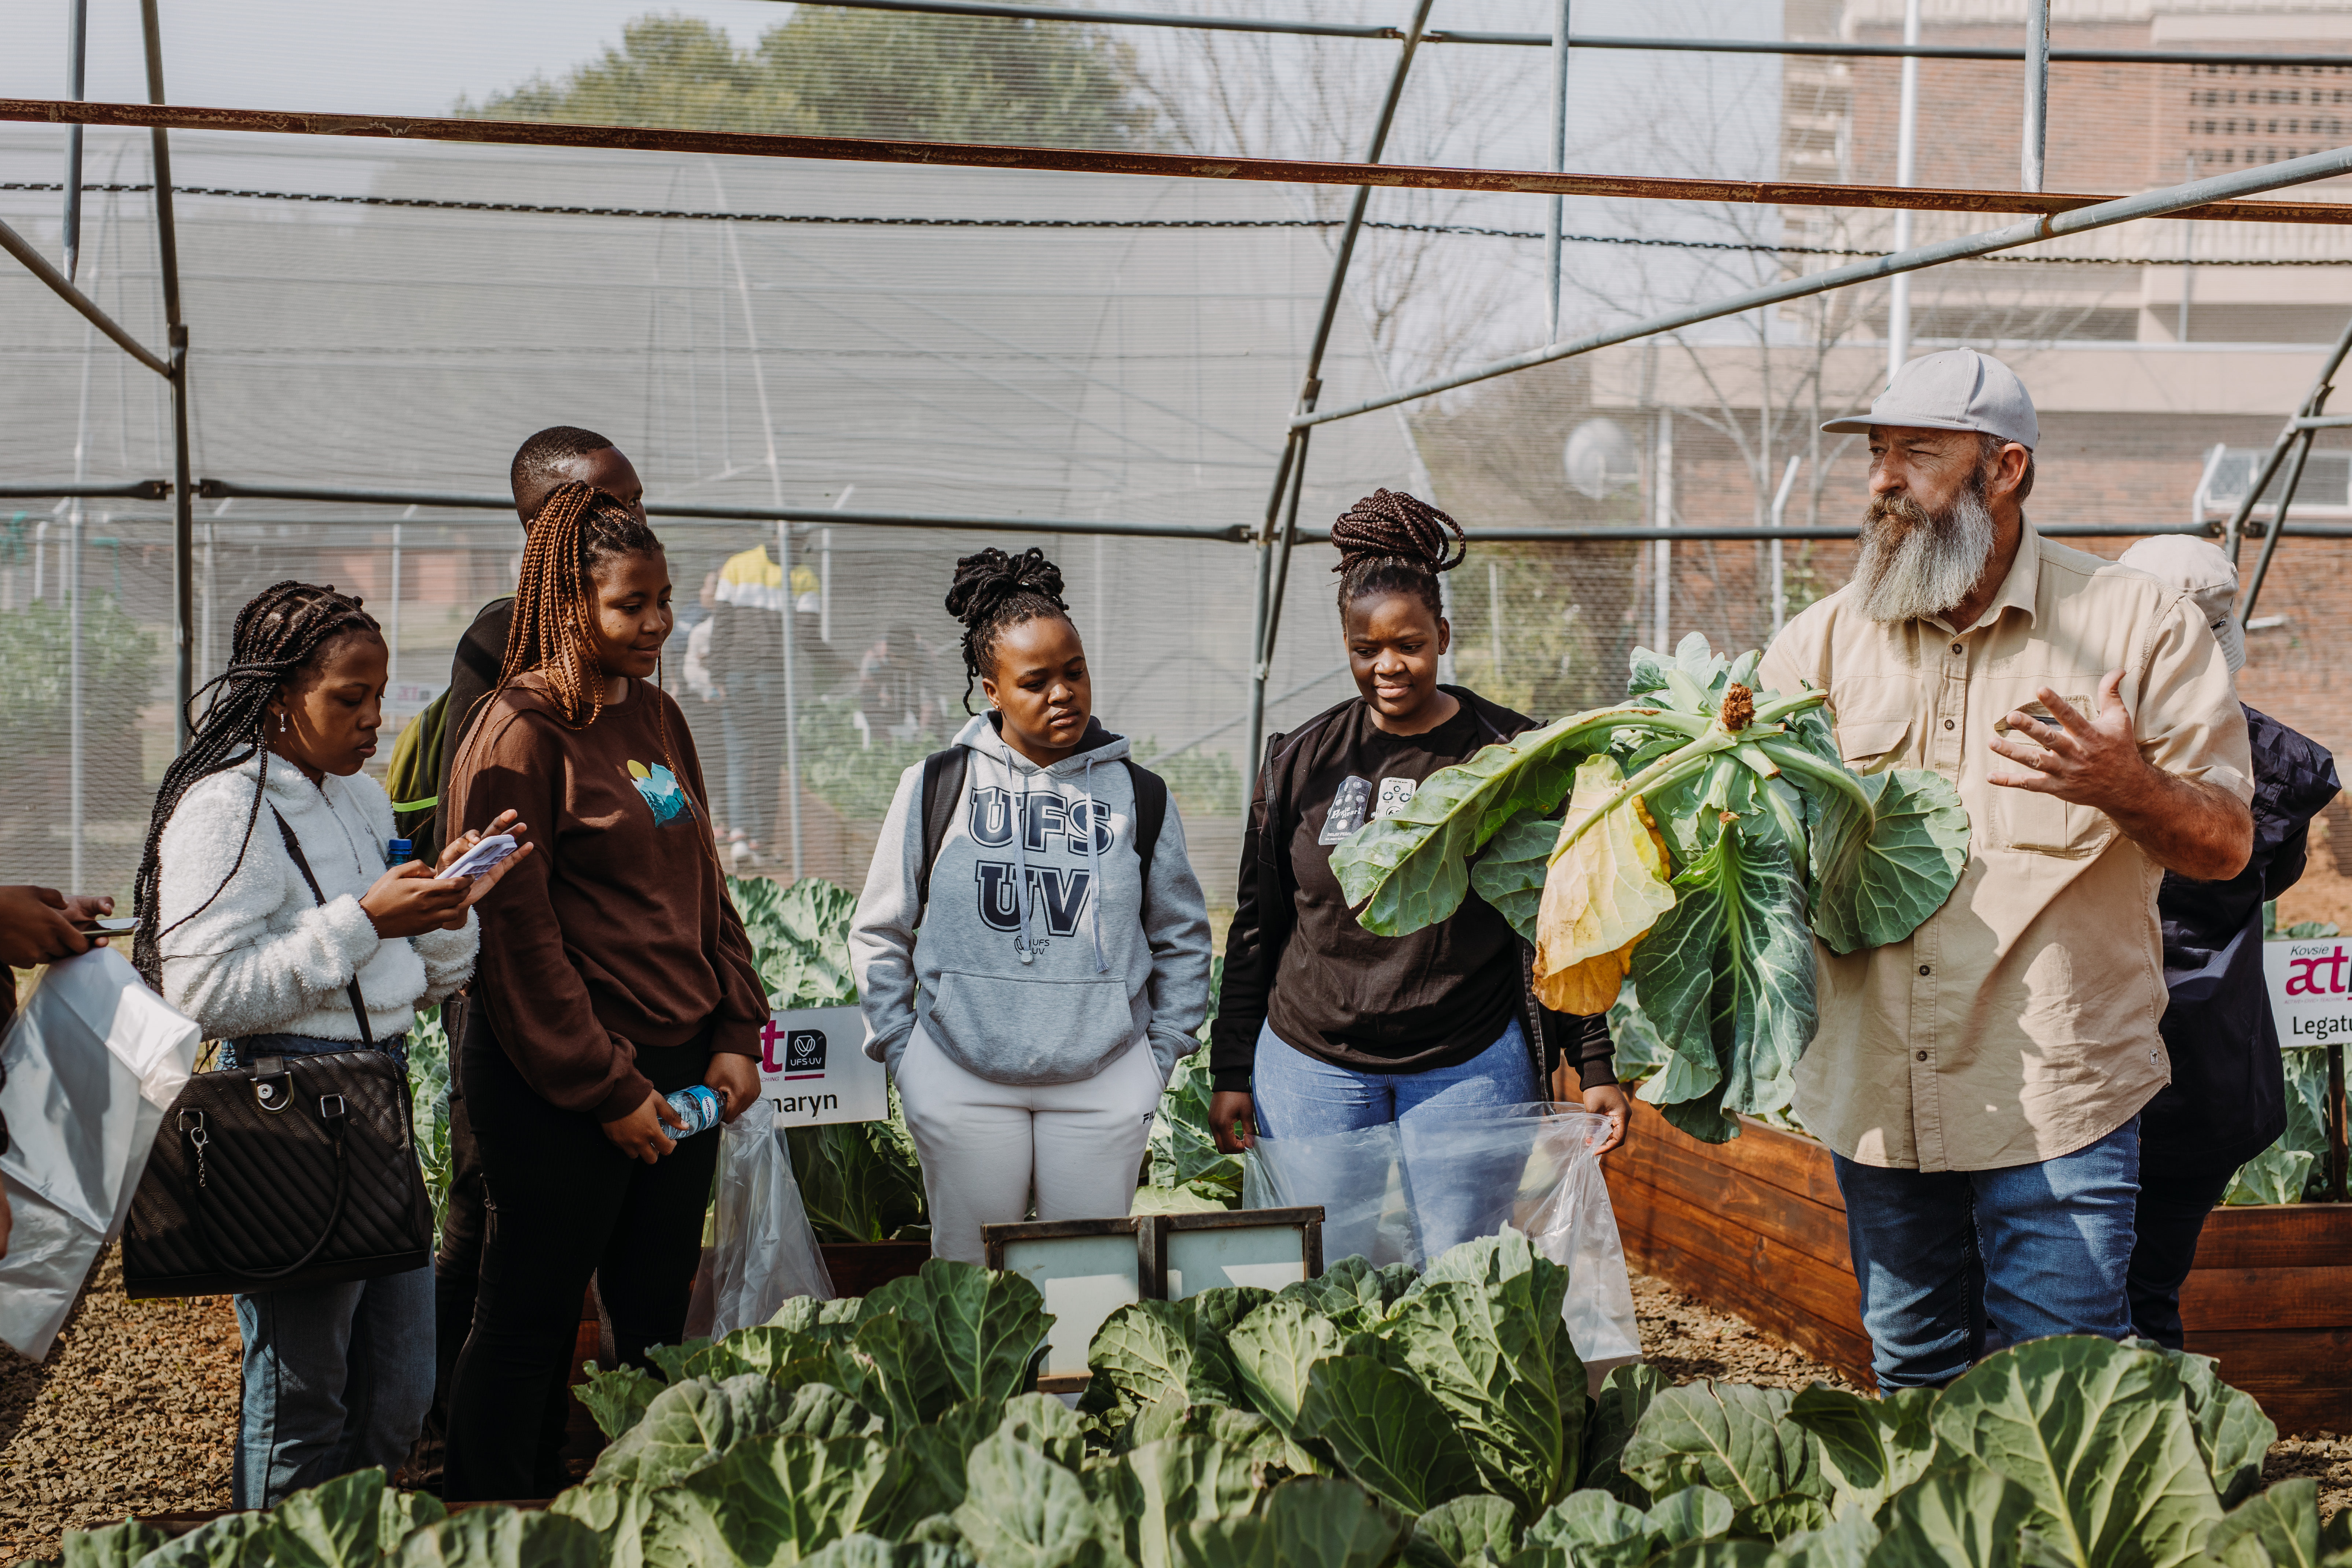 The GROW with Thabo event also included the harvesting of vegetables, more specifically cabbage and spinach